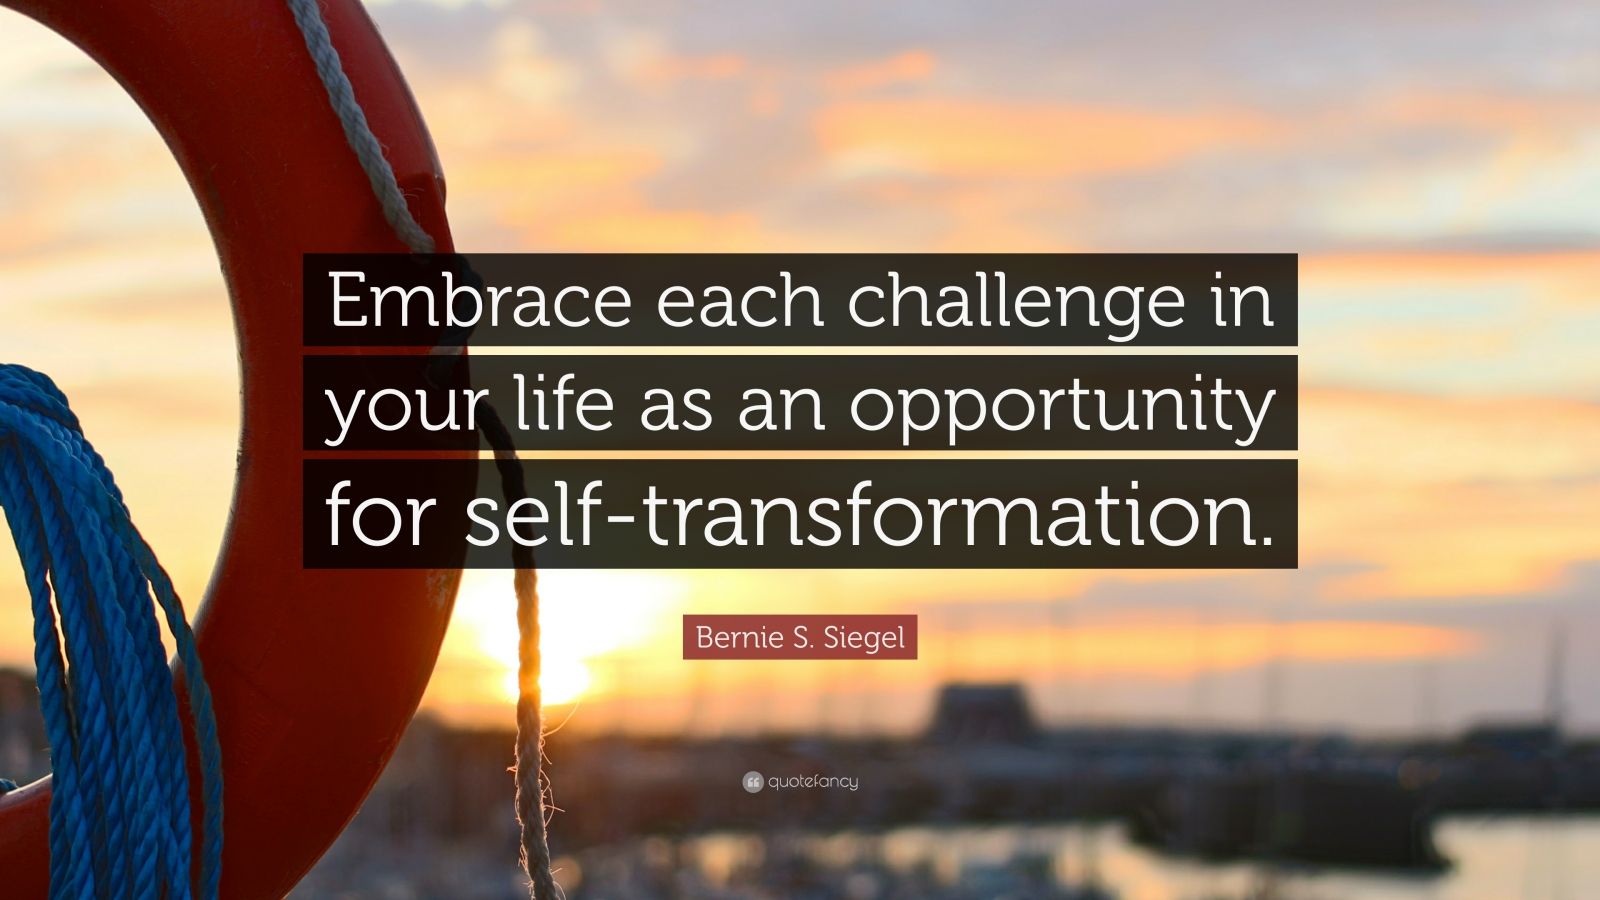 Bernie S. Siegel Quote: “Embrace each challenge in your life as an ...